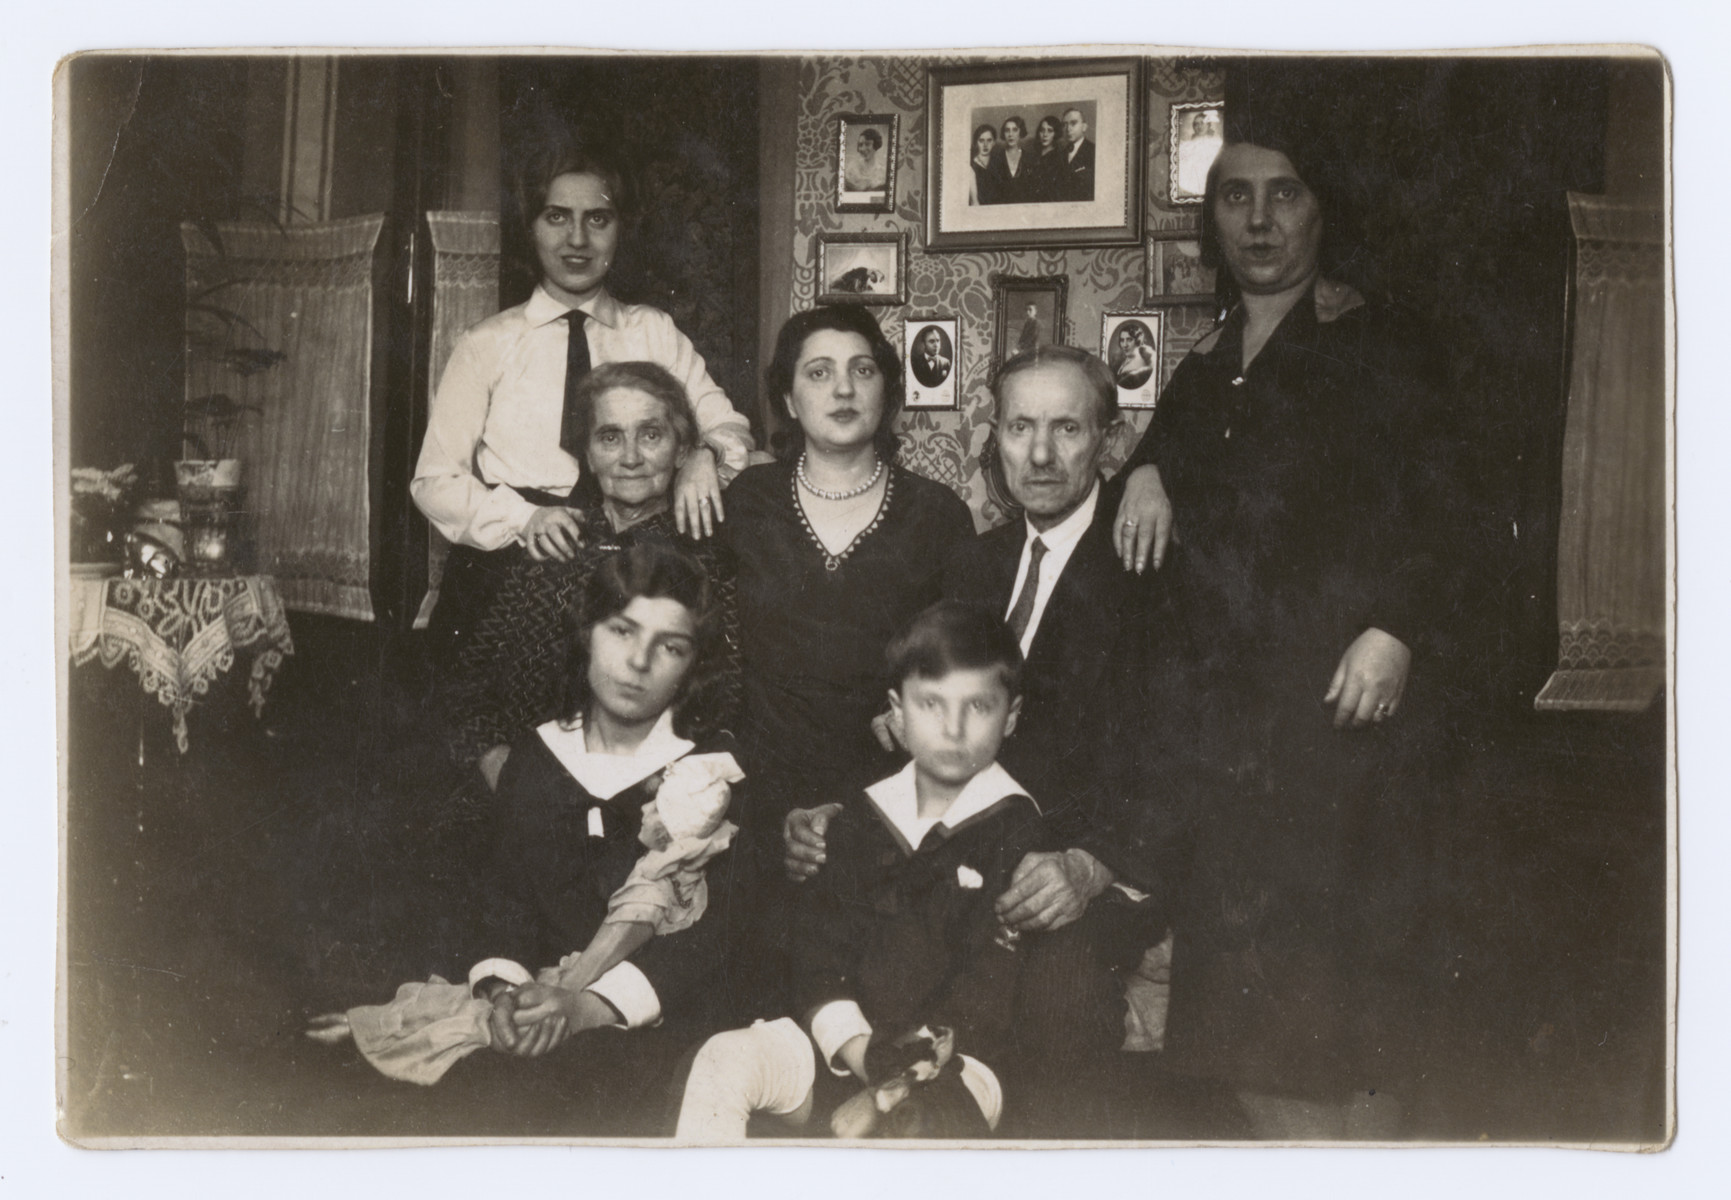 The extended Schwarz family poses for a group portrait in their home.  

Marta Koranyi is at the bottom left; her brother Erwin is at the bottom right.  Also pictured are her parents, Sigmond and Sara (nee Schwarz) Koranyi , and grandparents.  Her maternal aunt is at the top right.